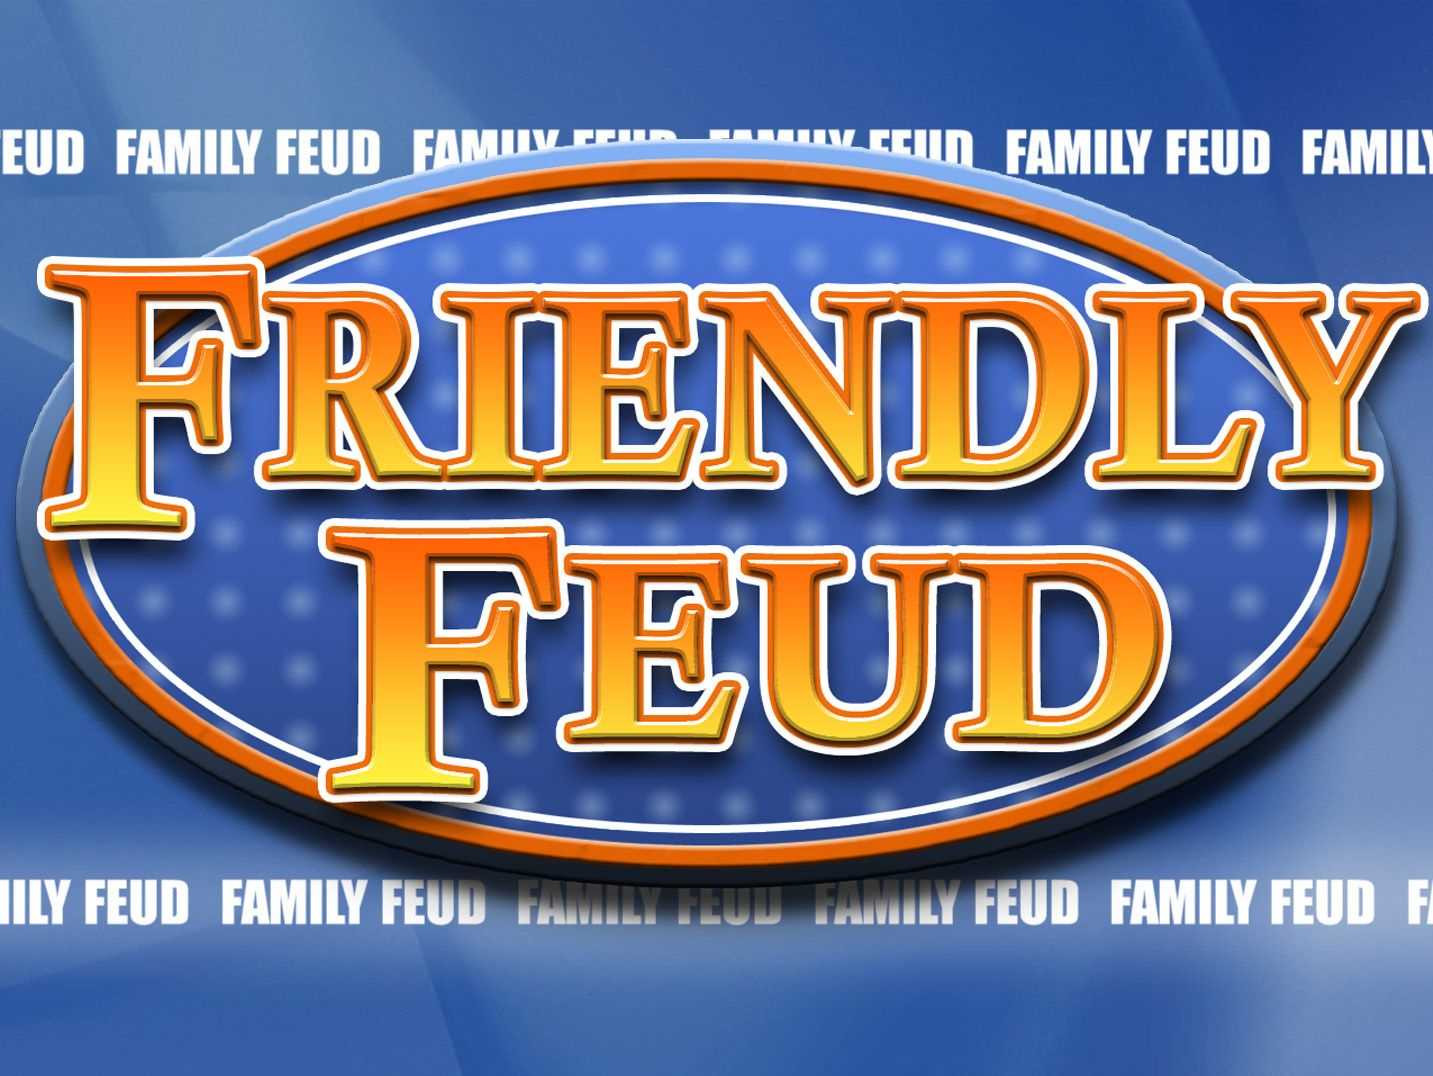 006 Family Feud Powerpoint Template Unforgettable Ideas Fast Pertaining To Family Feud Powerpoint Template With Sound